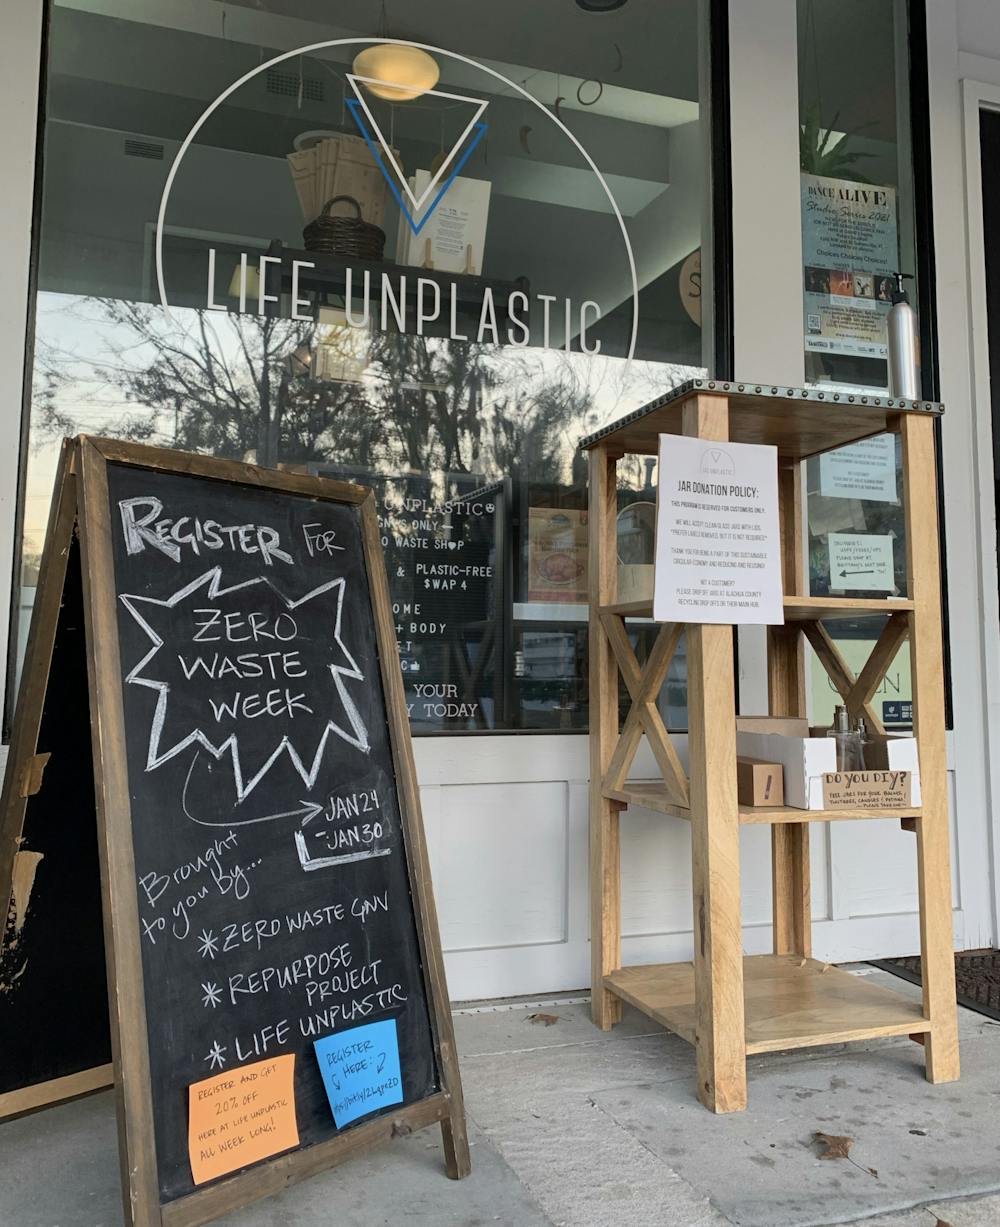 The storefront of Life Unplastic offers information about the second annual Zero Waste Week.